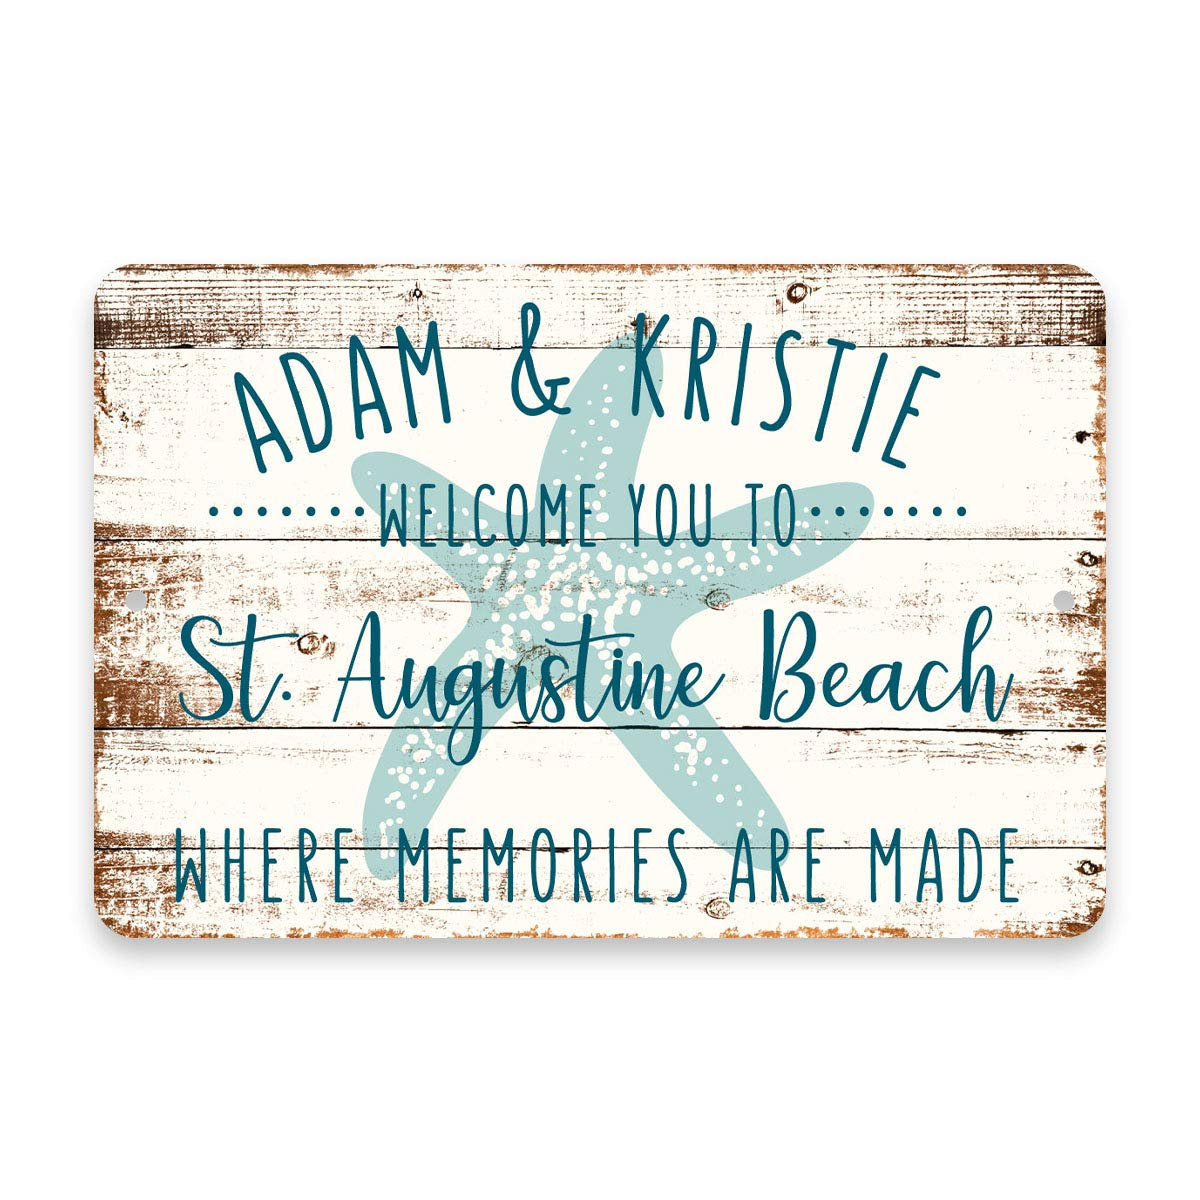 Personalized Welcome to St. Augustine Beach Where Memories are Made Sign - 8 X 12 Metal Sign with Wood Look